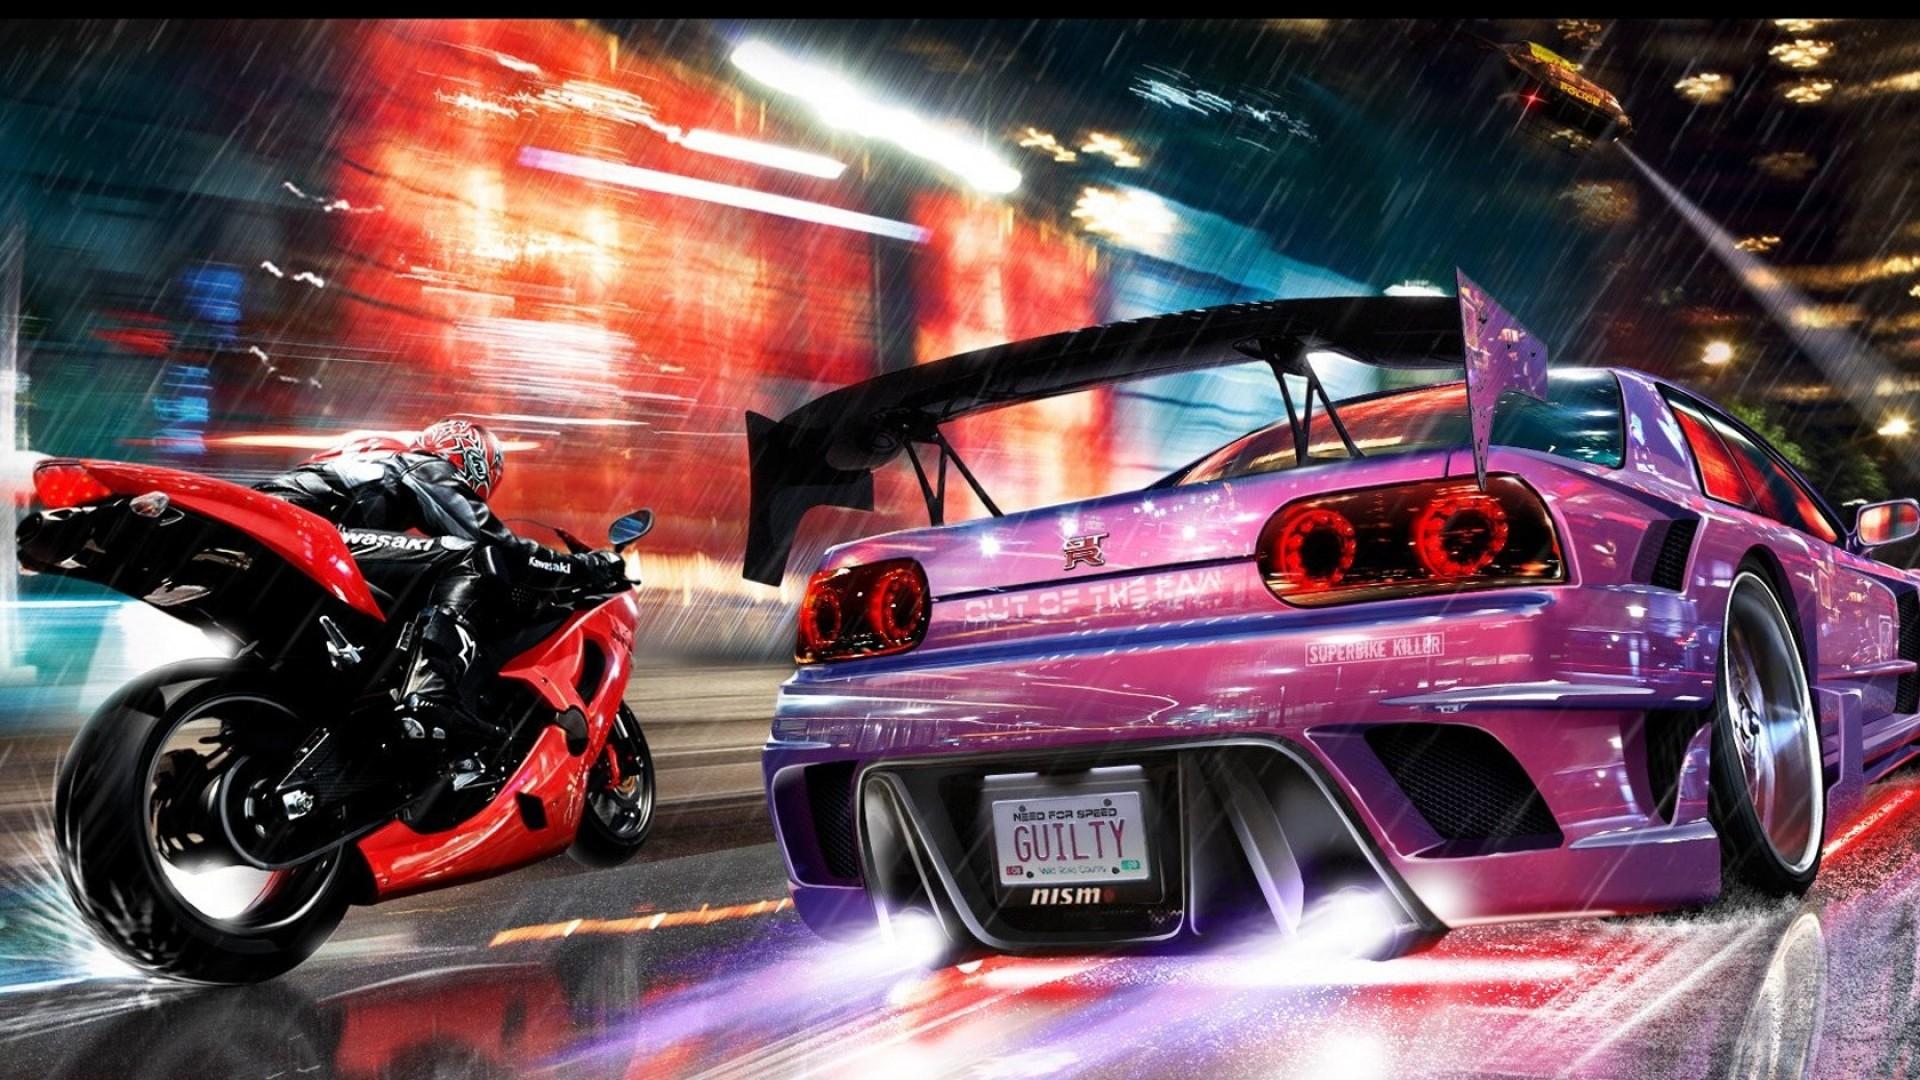 Nfs Carbon Wallpaper background picture